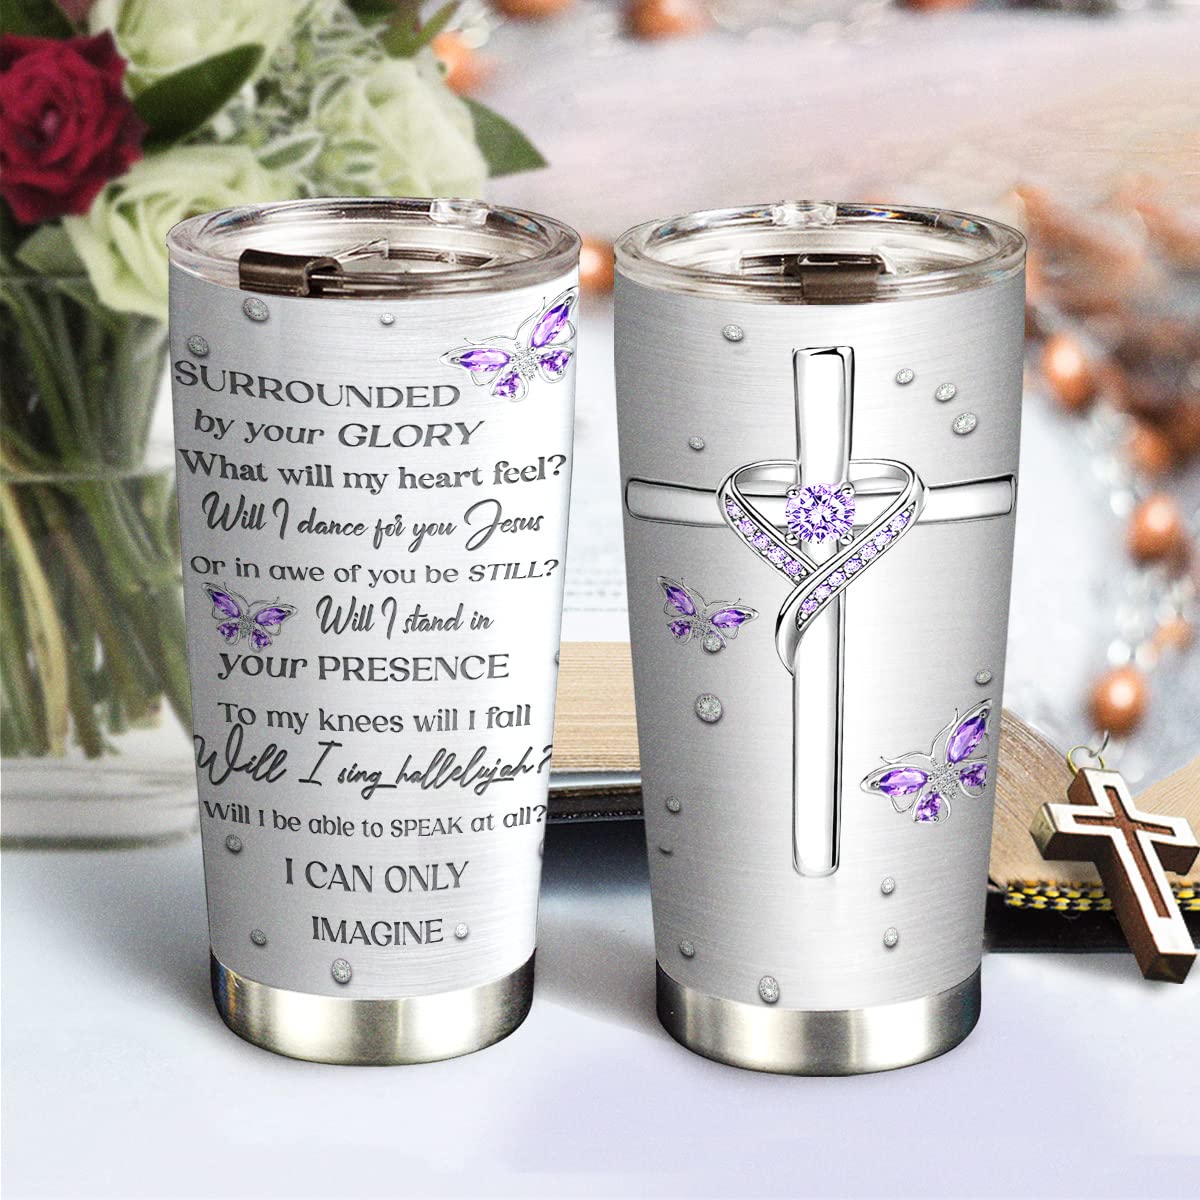 64HYDRO 20oz Christian Gifts for Women, Mom, Friends, Valentines Day Gifts for Her Religious Gifts for Women Printed Jewelry Butterfly Faith I Can Only Imagine Tumbler Cup, Travel Coffee Mug with Lid